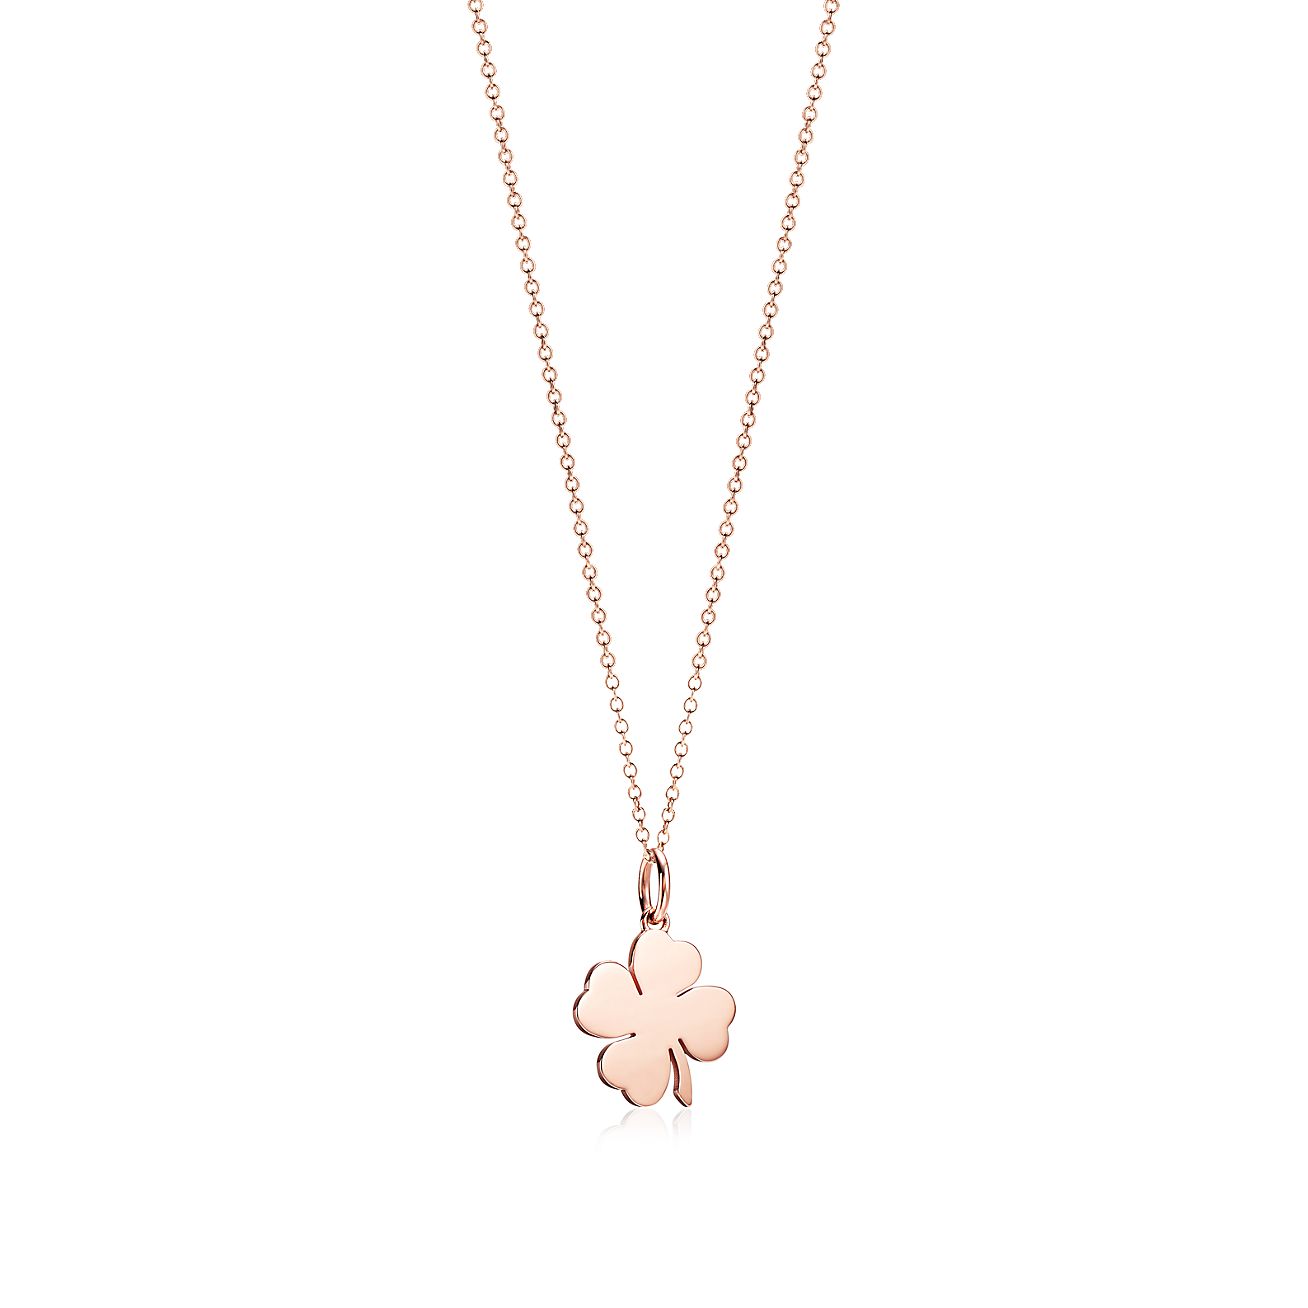 tiffany and co four leaf clover necklace